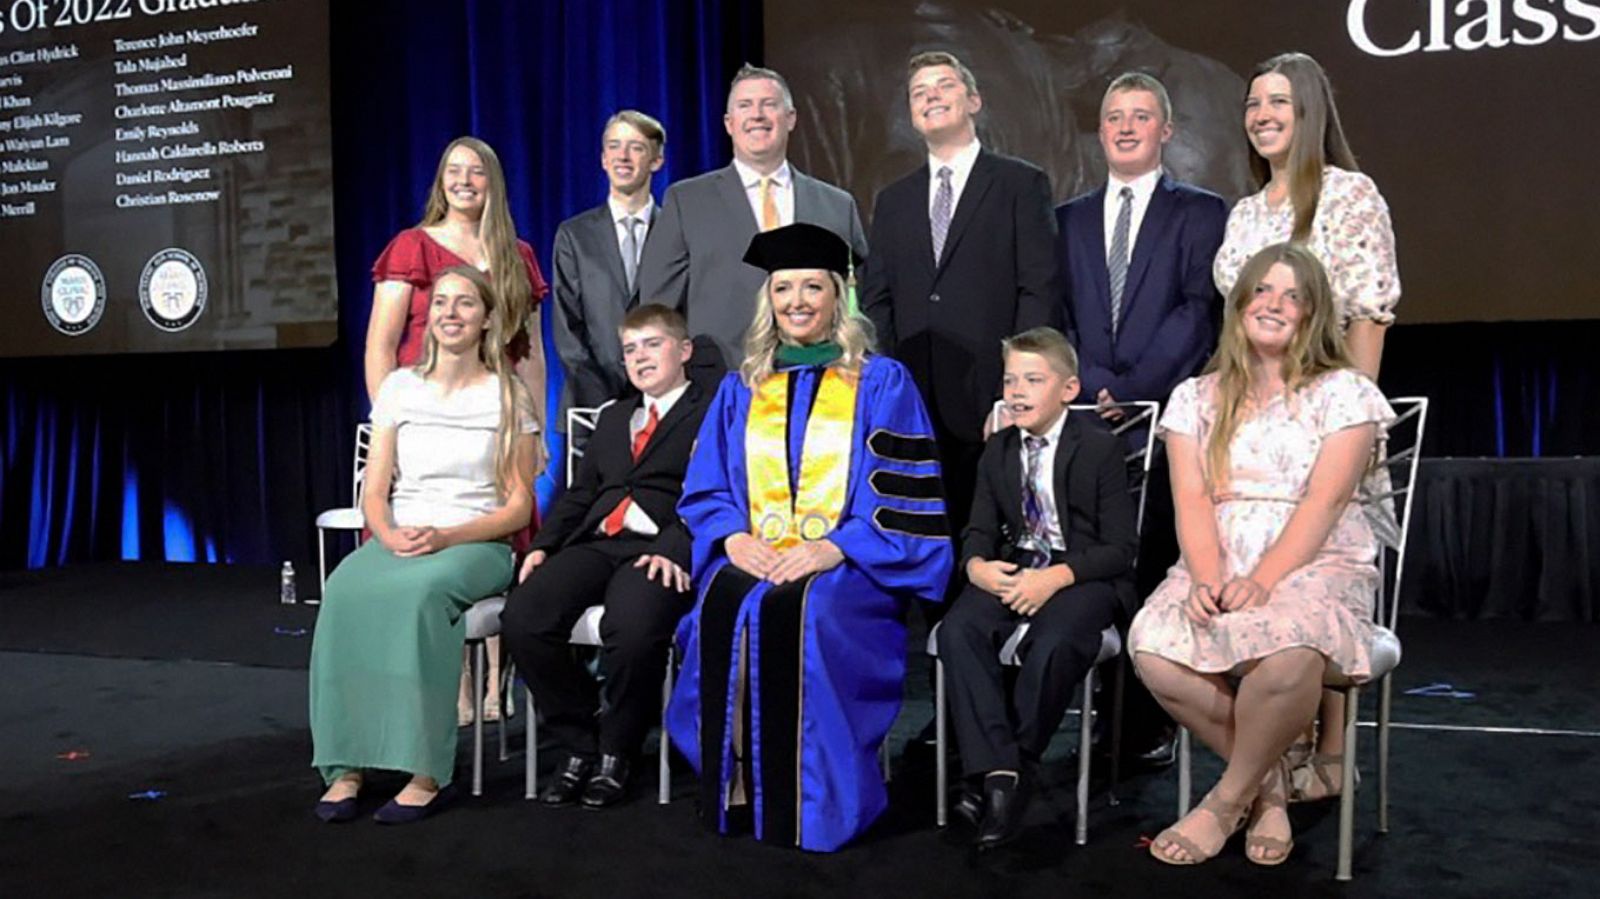 Mom of 9 graduates from medical school, plans to become a neurosurgeon